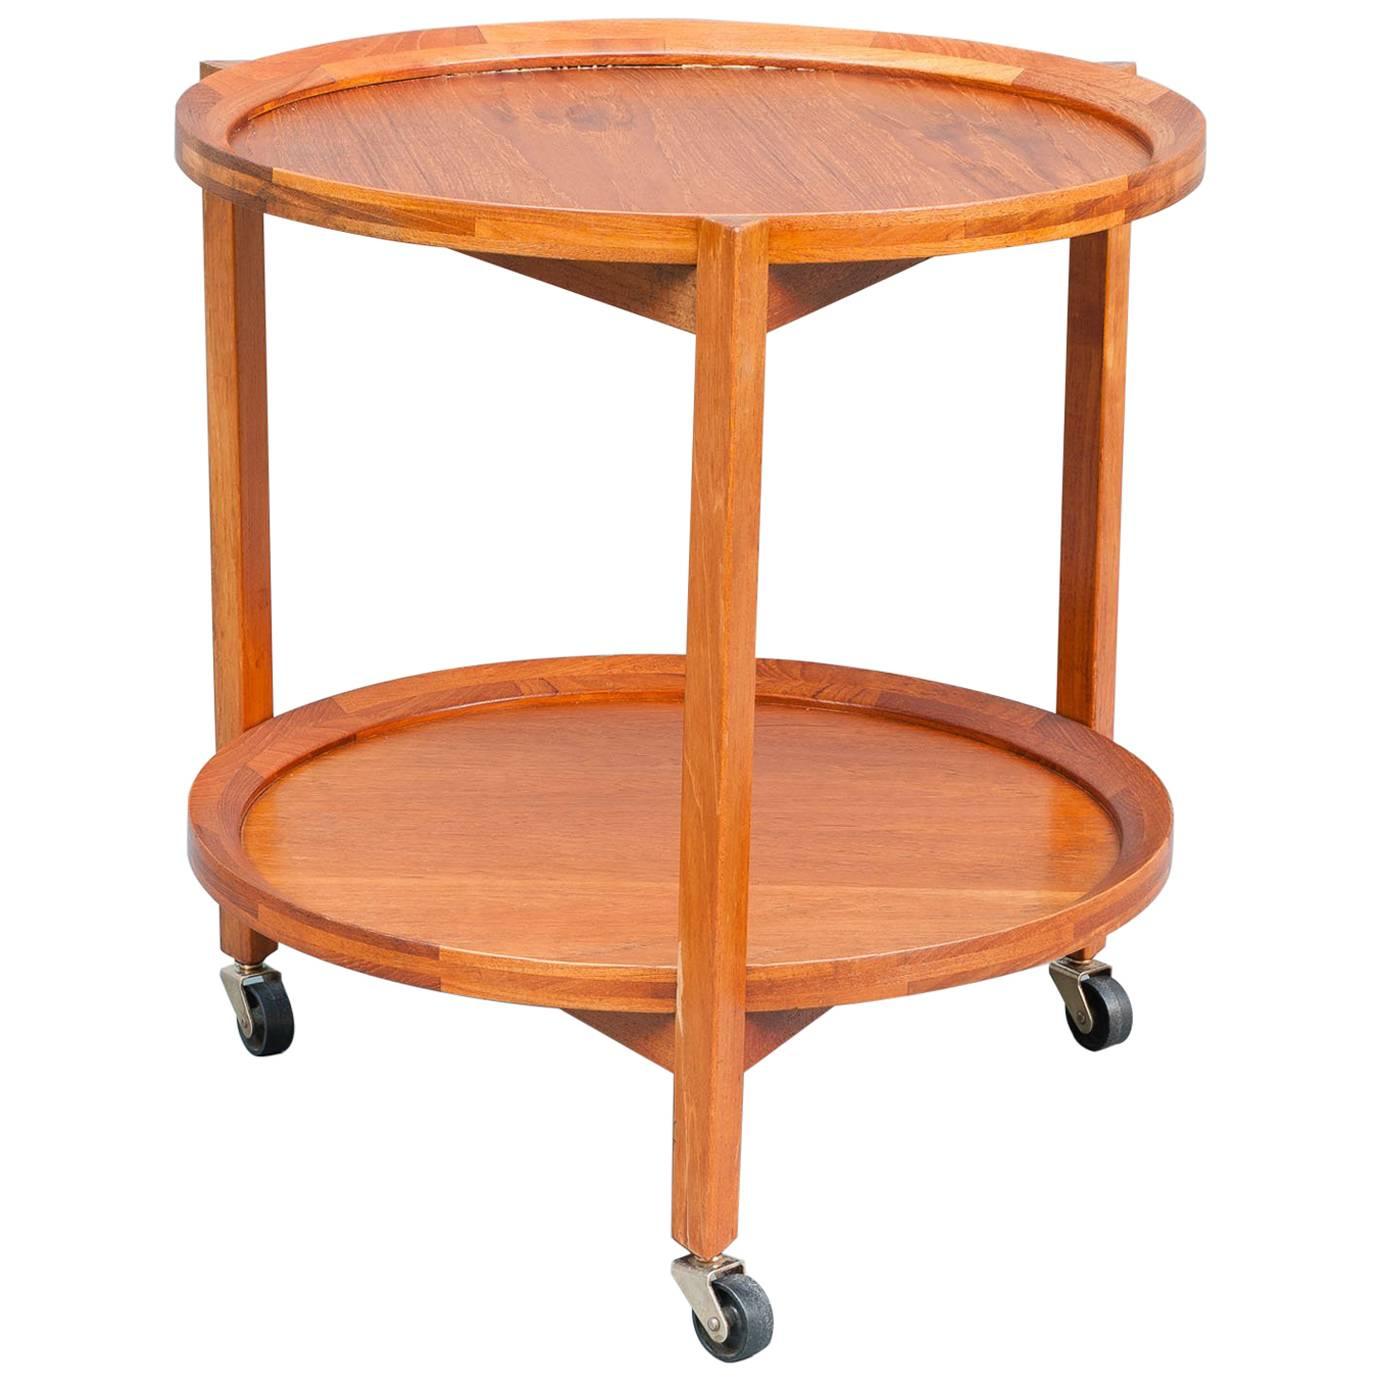 1960s Sika Møbler Midcentury Teak Round Serving Trolley Cart Inc. Two Trays 